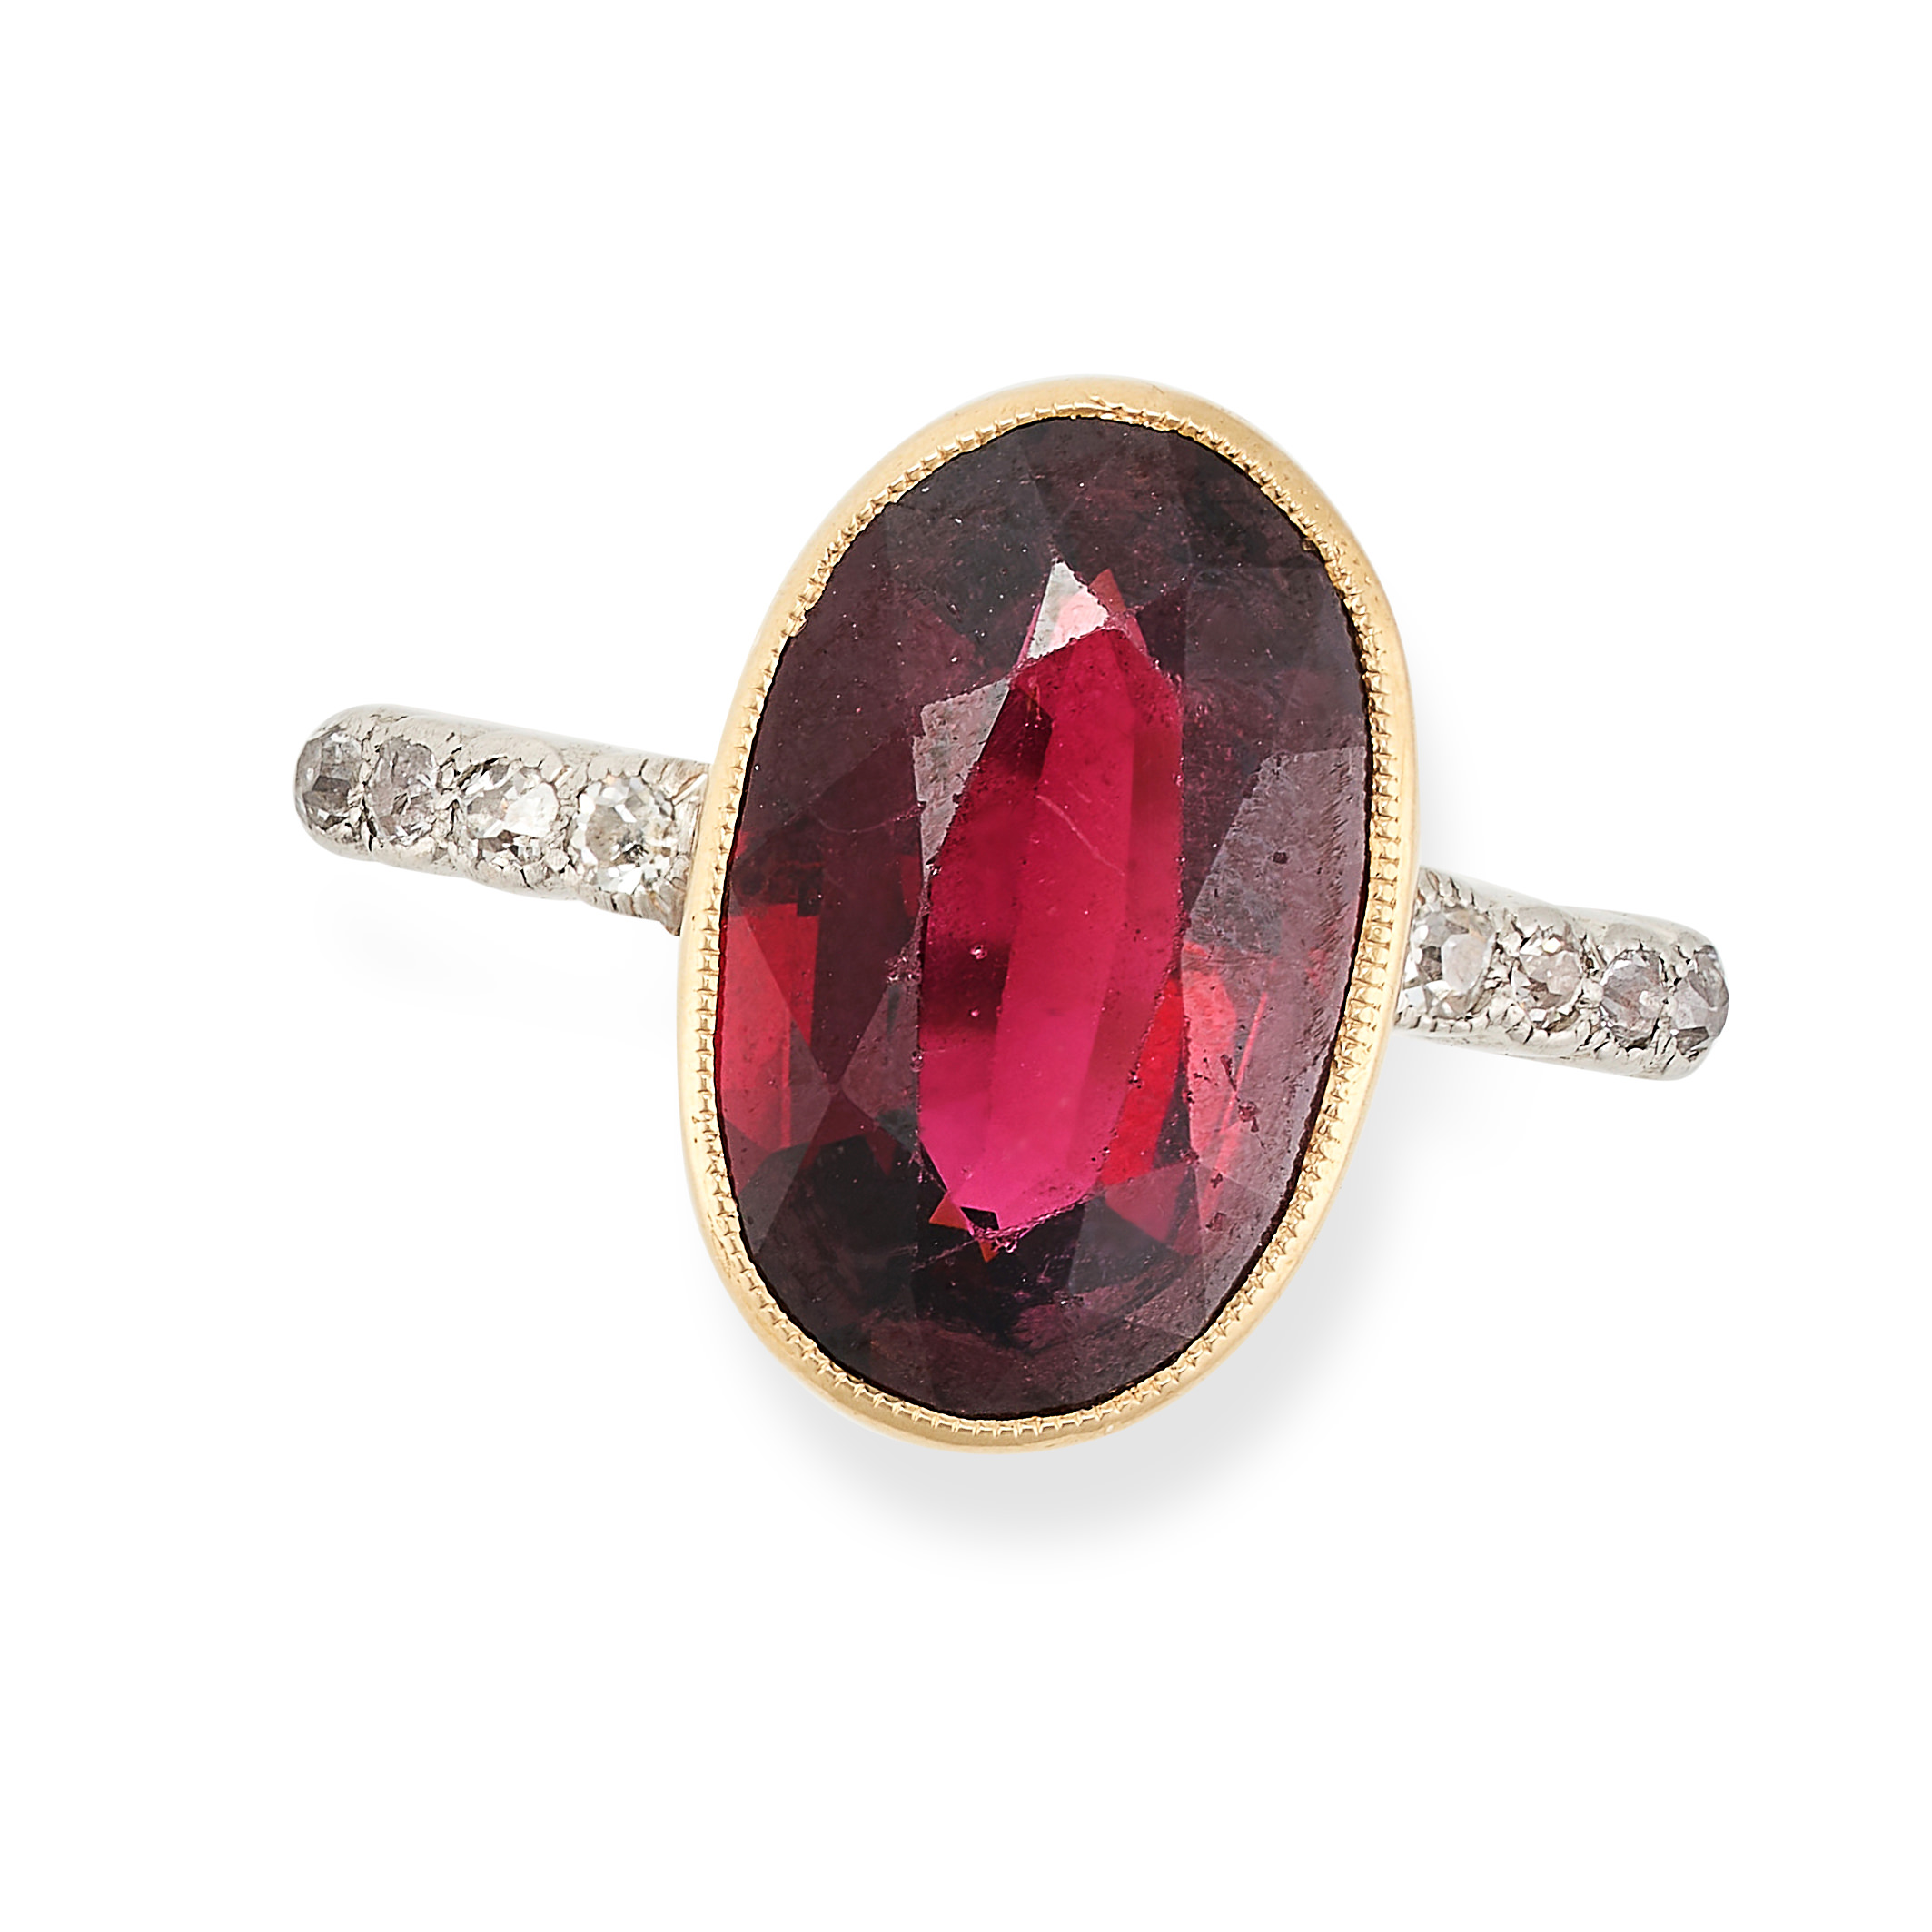 A GARNET AND DIAMOND RING set with an oval cut garnet, the shoulders accented by single cut